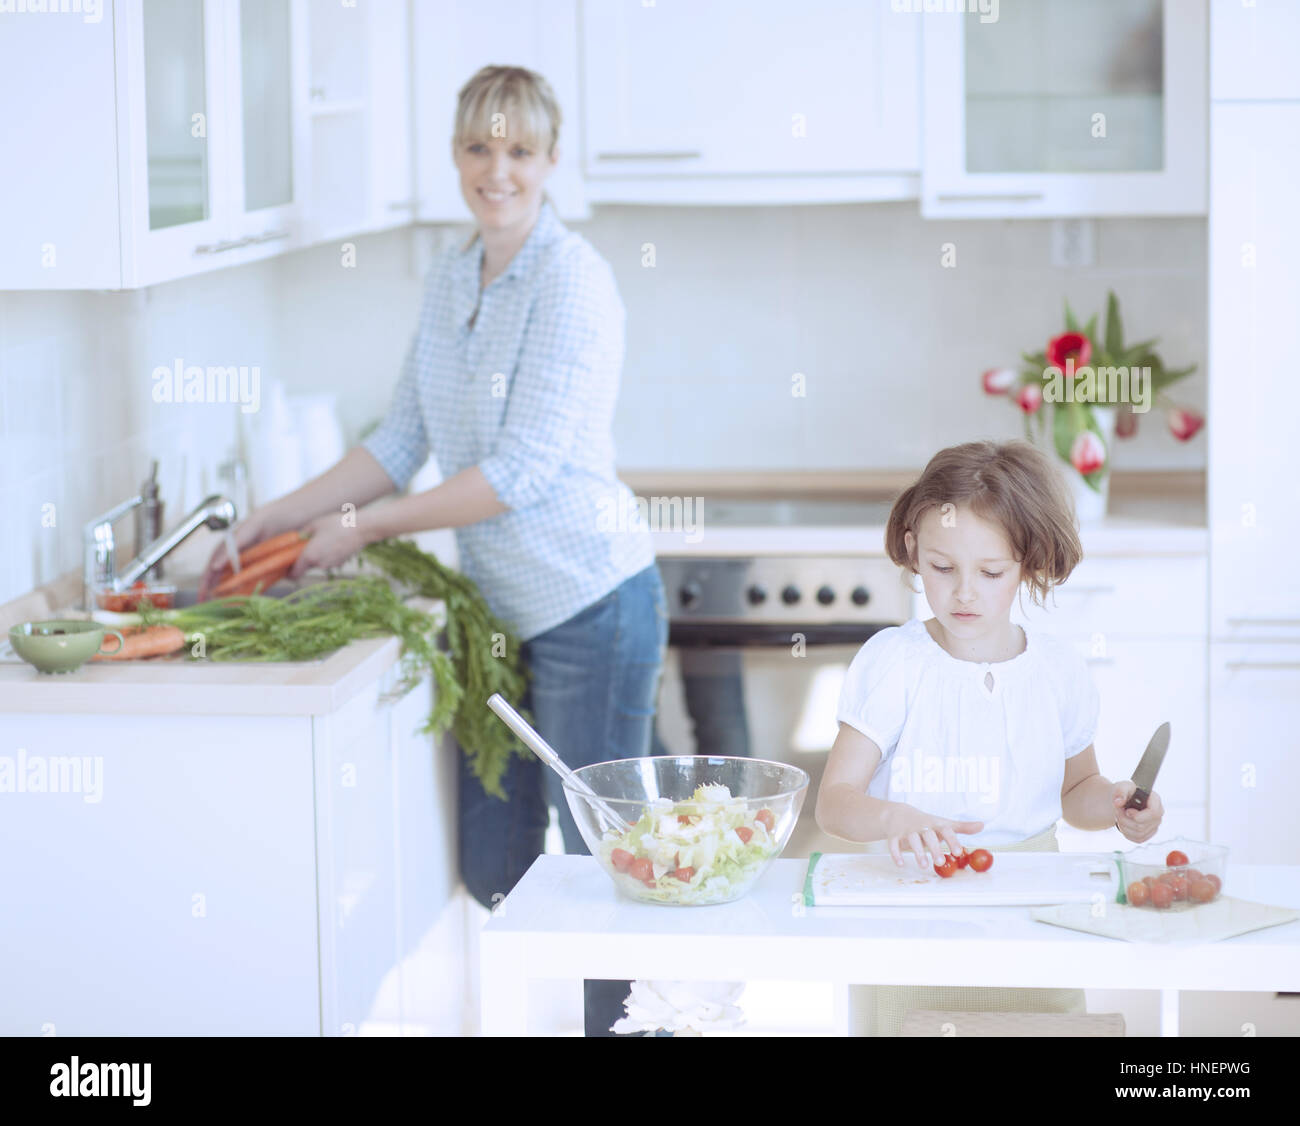 Mother and Daughter (8-9) preparing healthy meal in kitchen Stock Photo